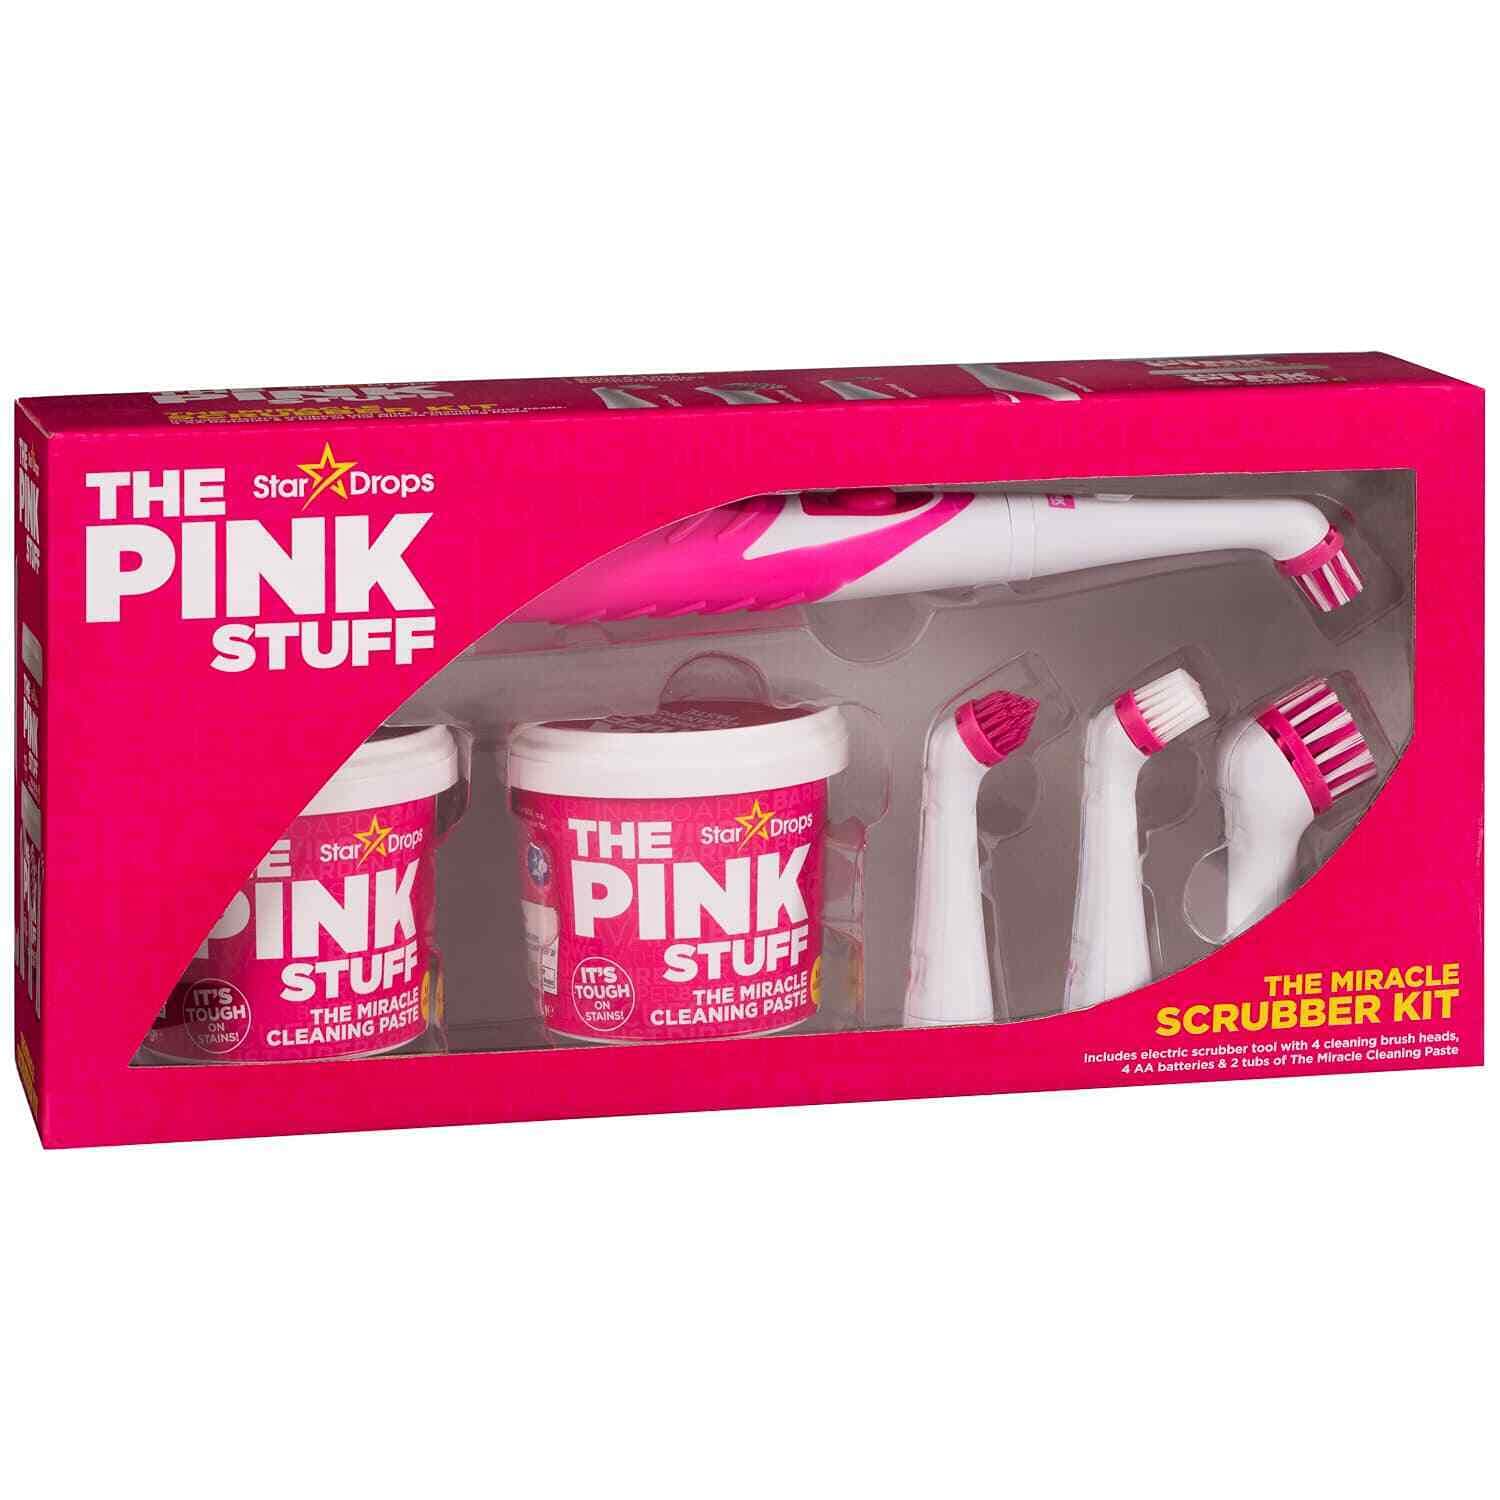 Homesavers - The The Pink Stuff Miracle Scrubbing Kit has